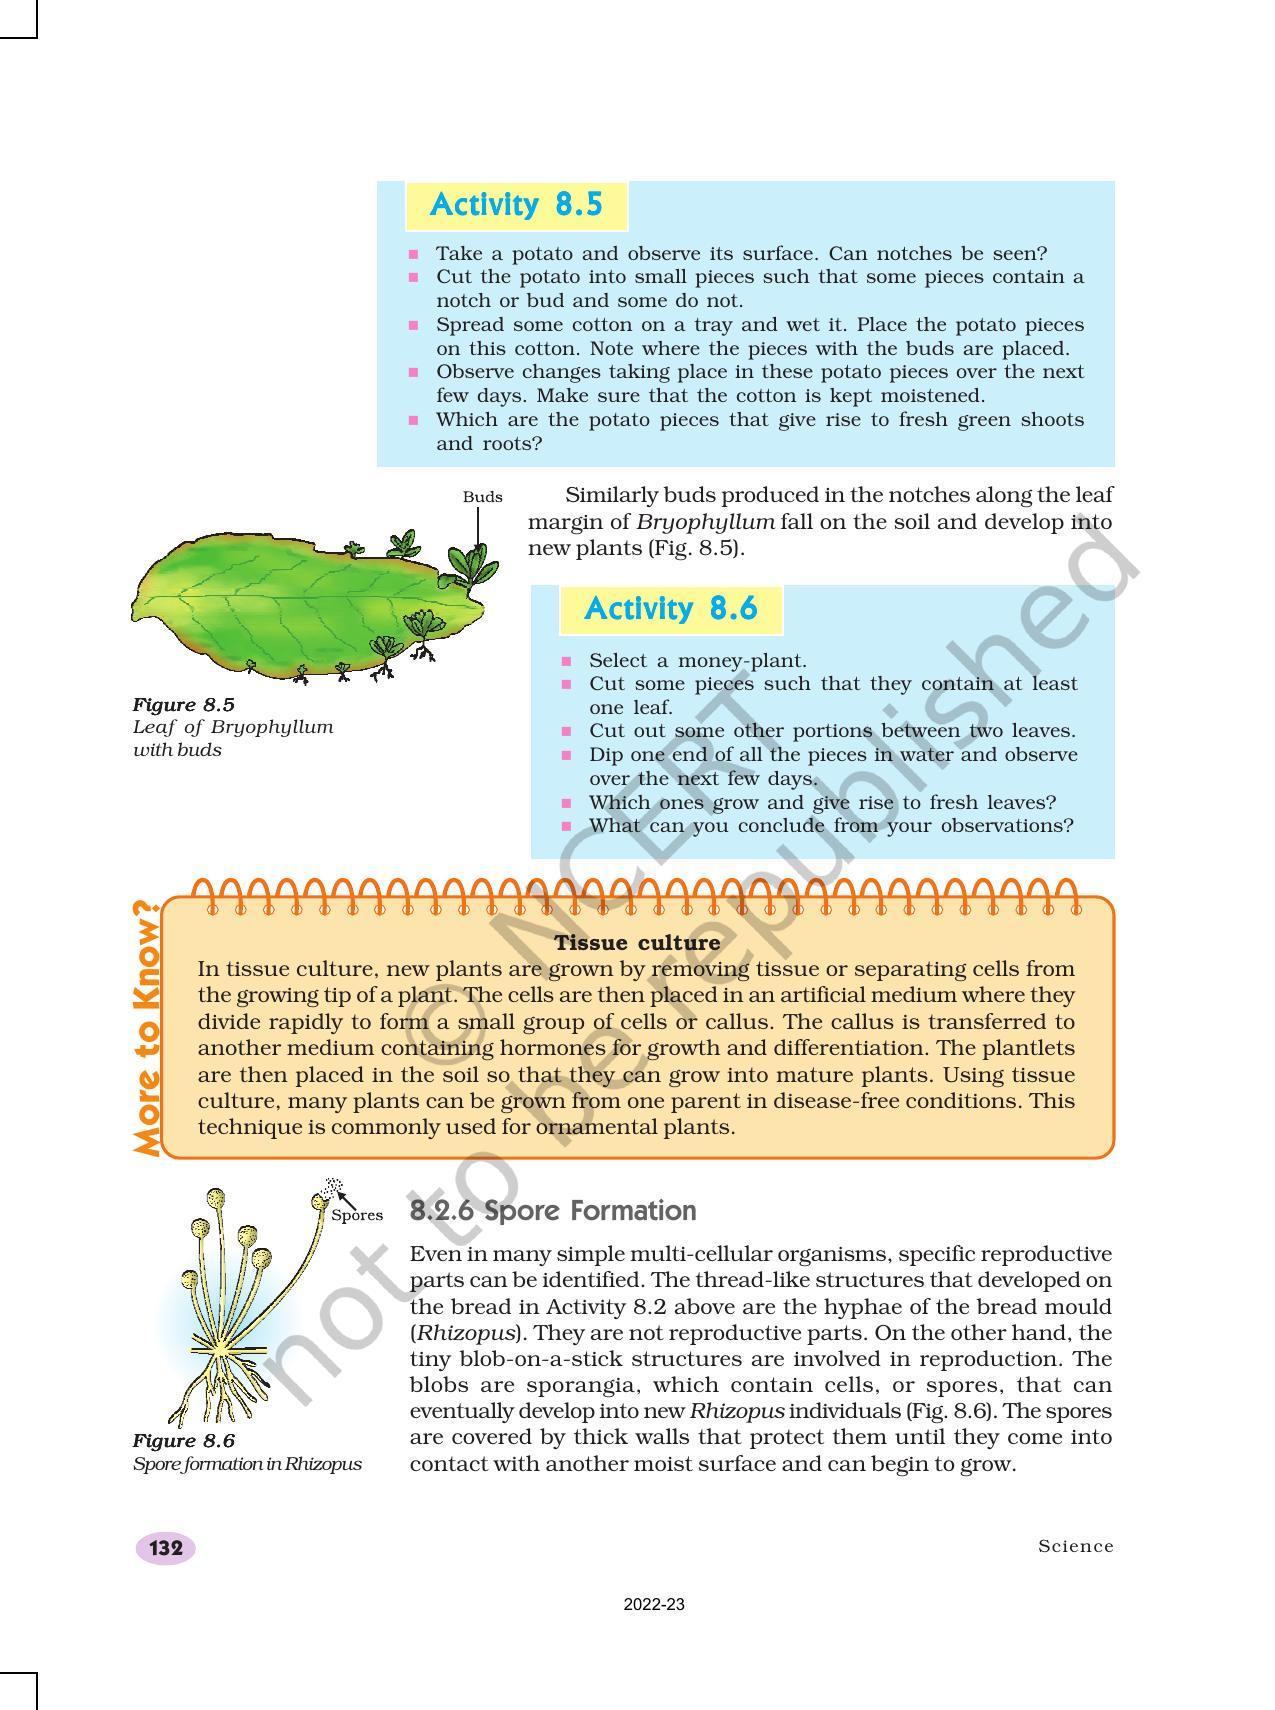 NCERT Book for Class 10 Science Chapter 8 How do Organisms Reproduce? - Page 6